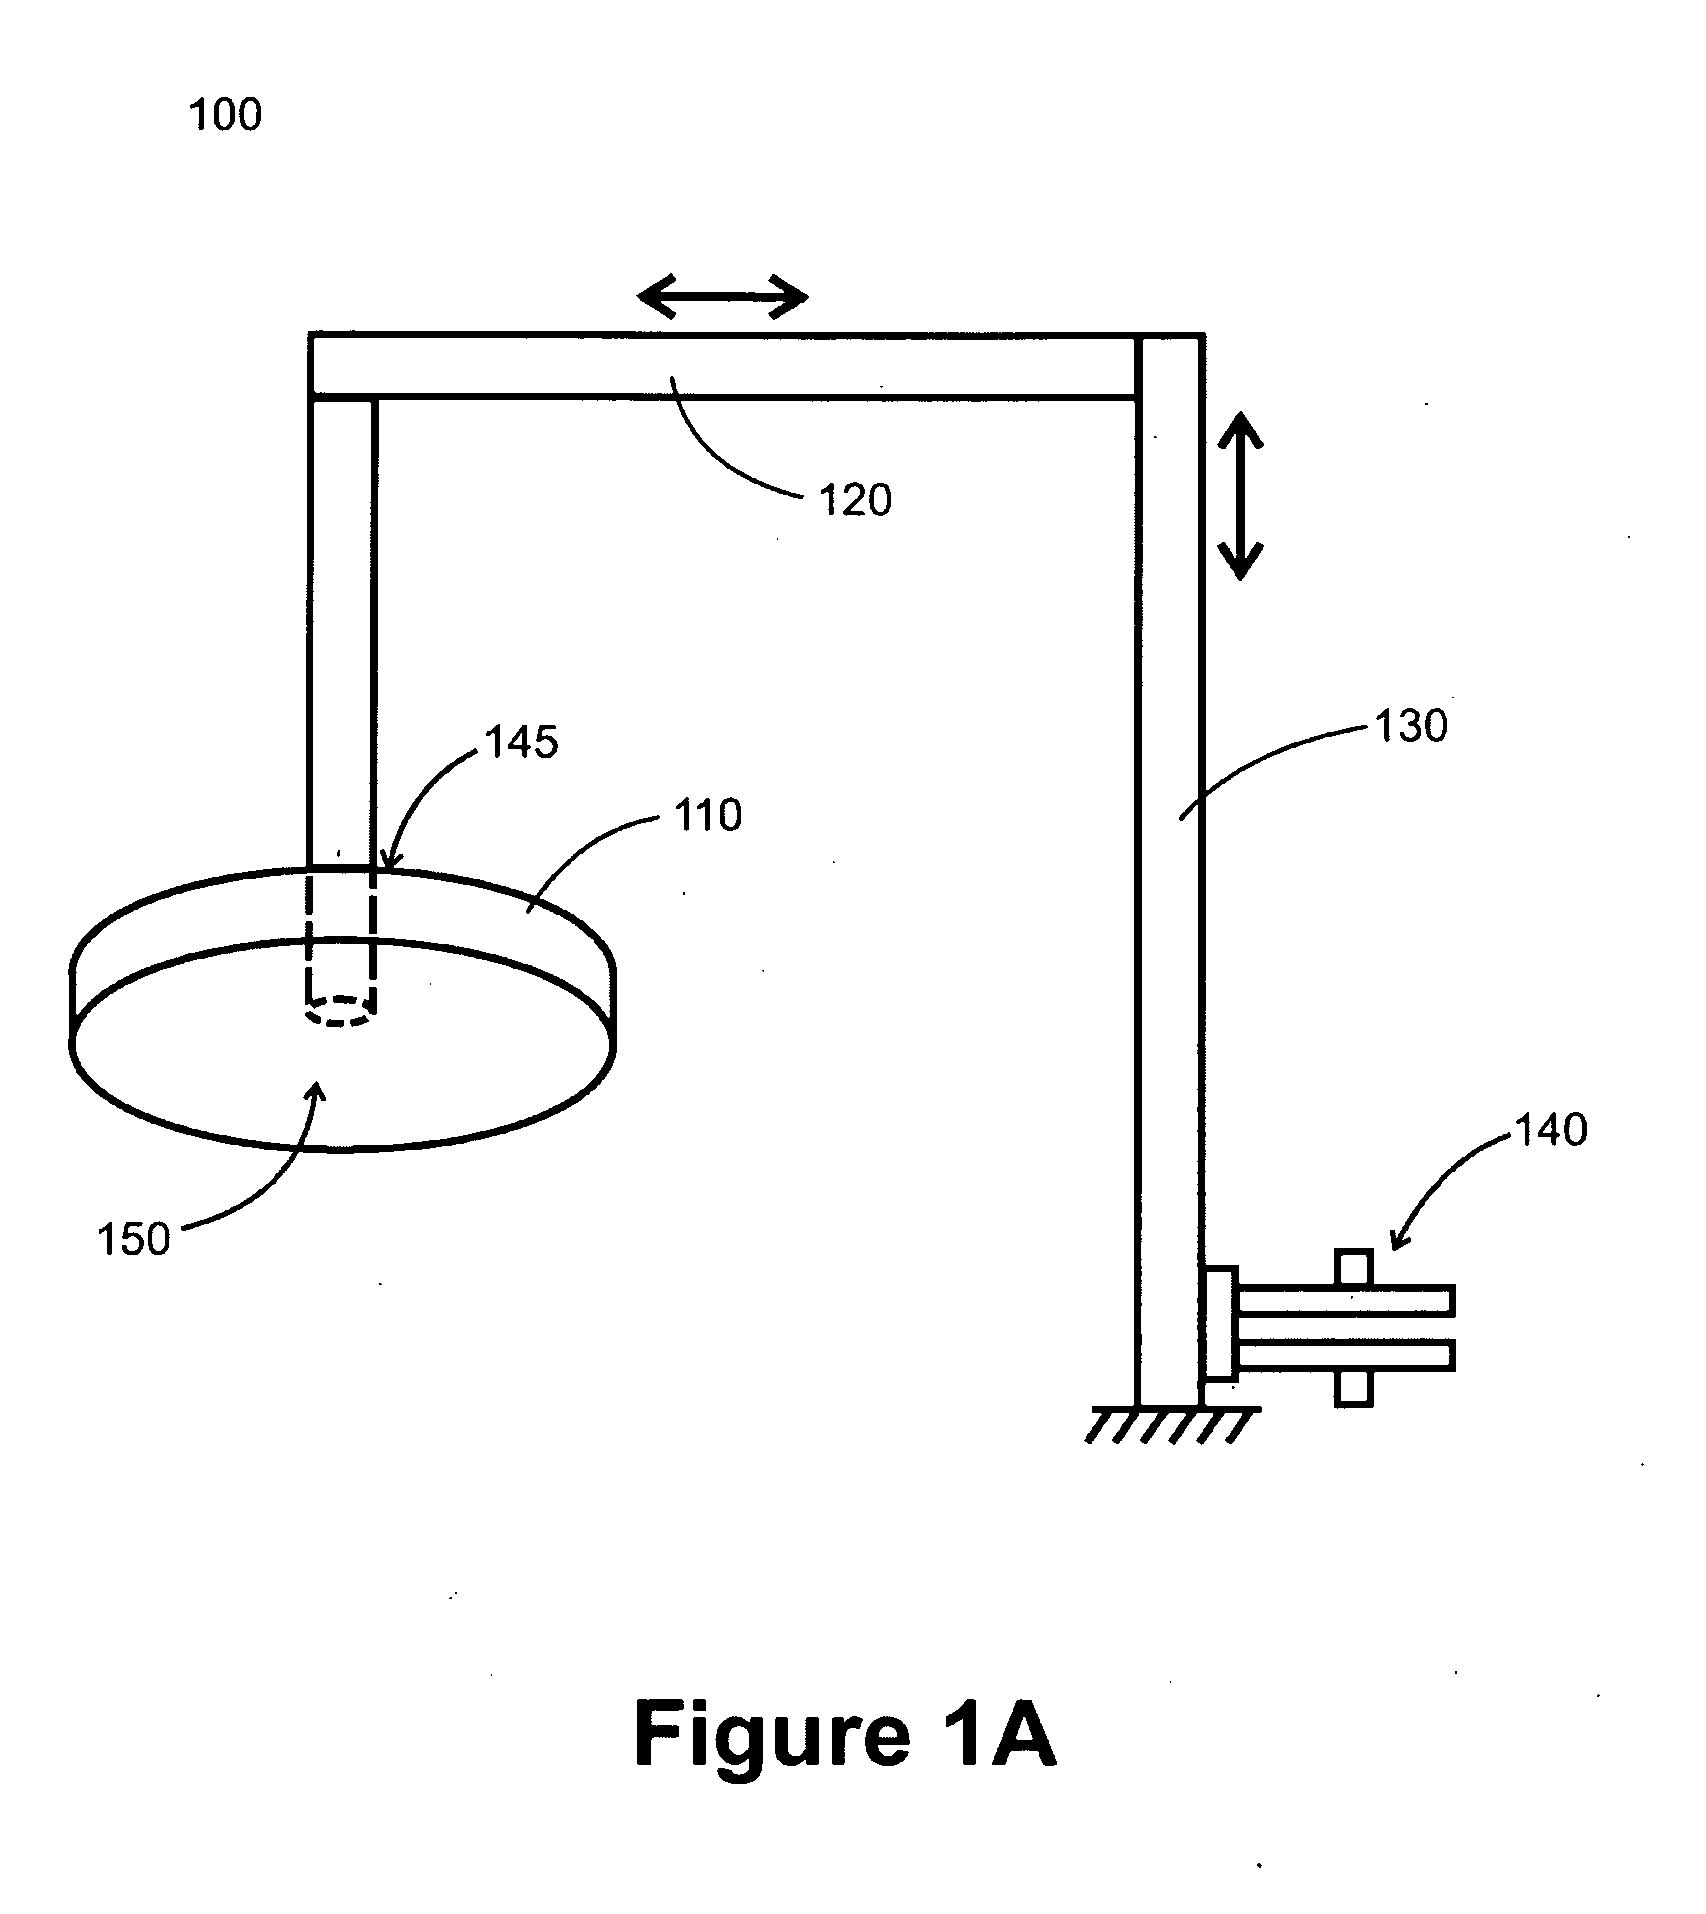 System and Method for Conducting Accelerated Soft Error Rate Testing